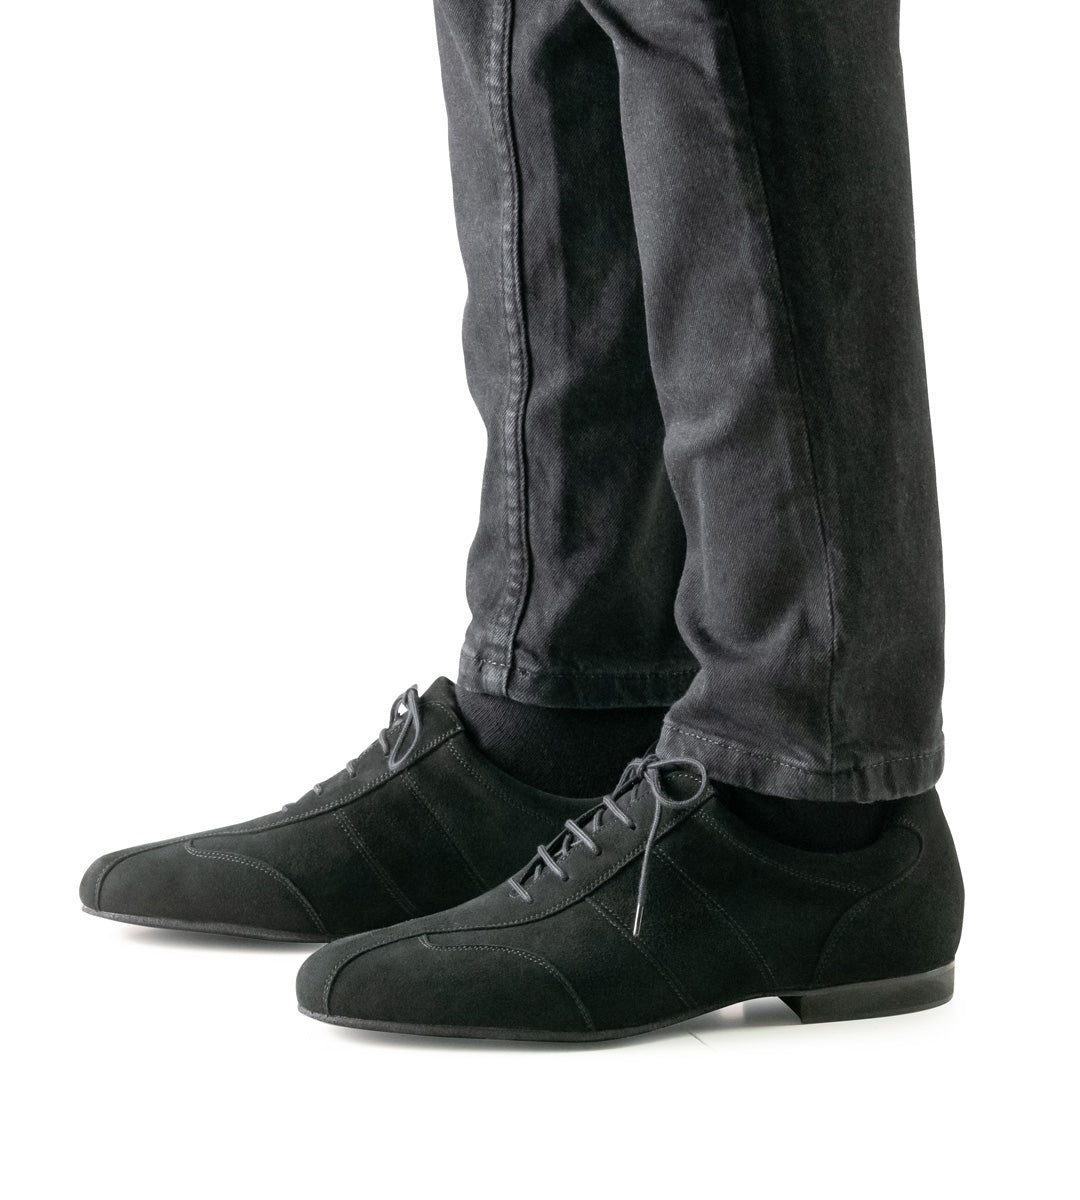 Werner Kern Cuneo Men's Suede Leather Ballroom Dance Shoe Available in Black or Gray